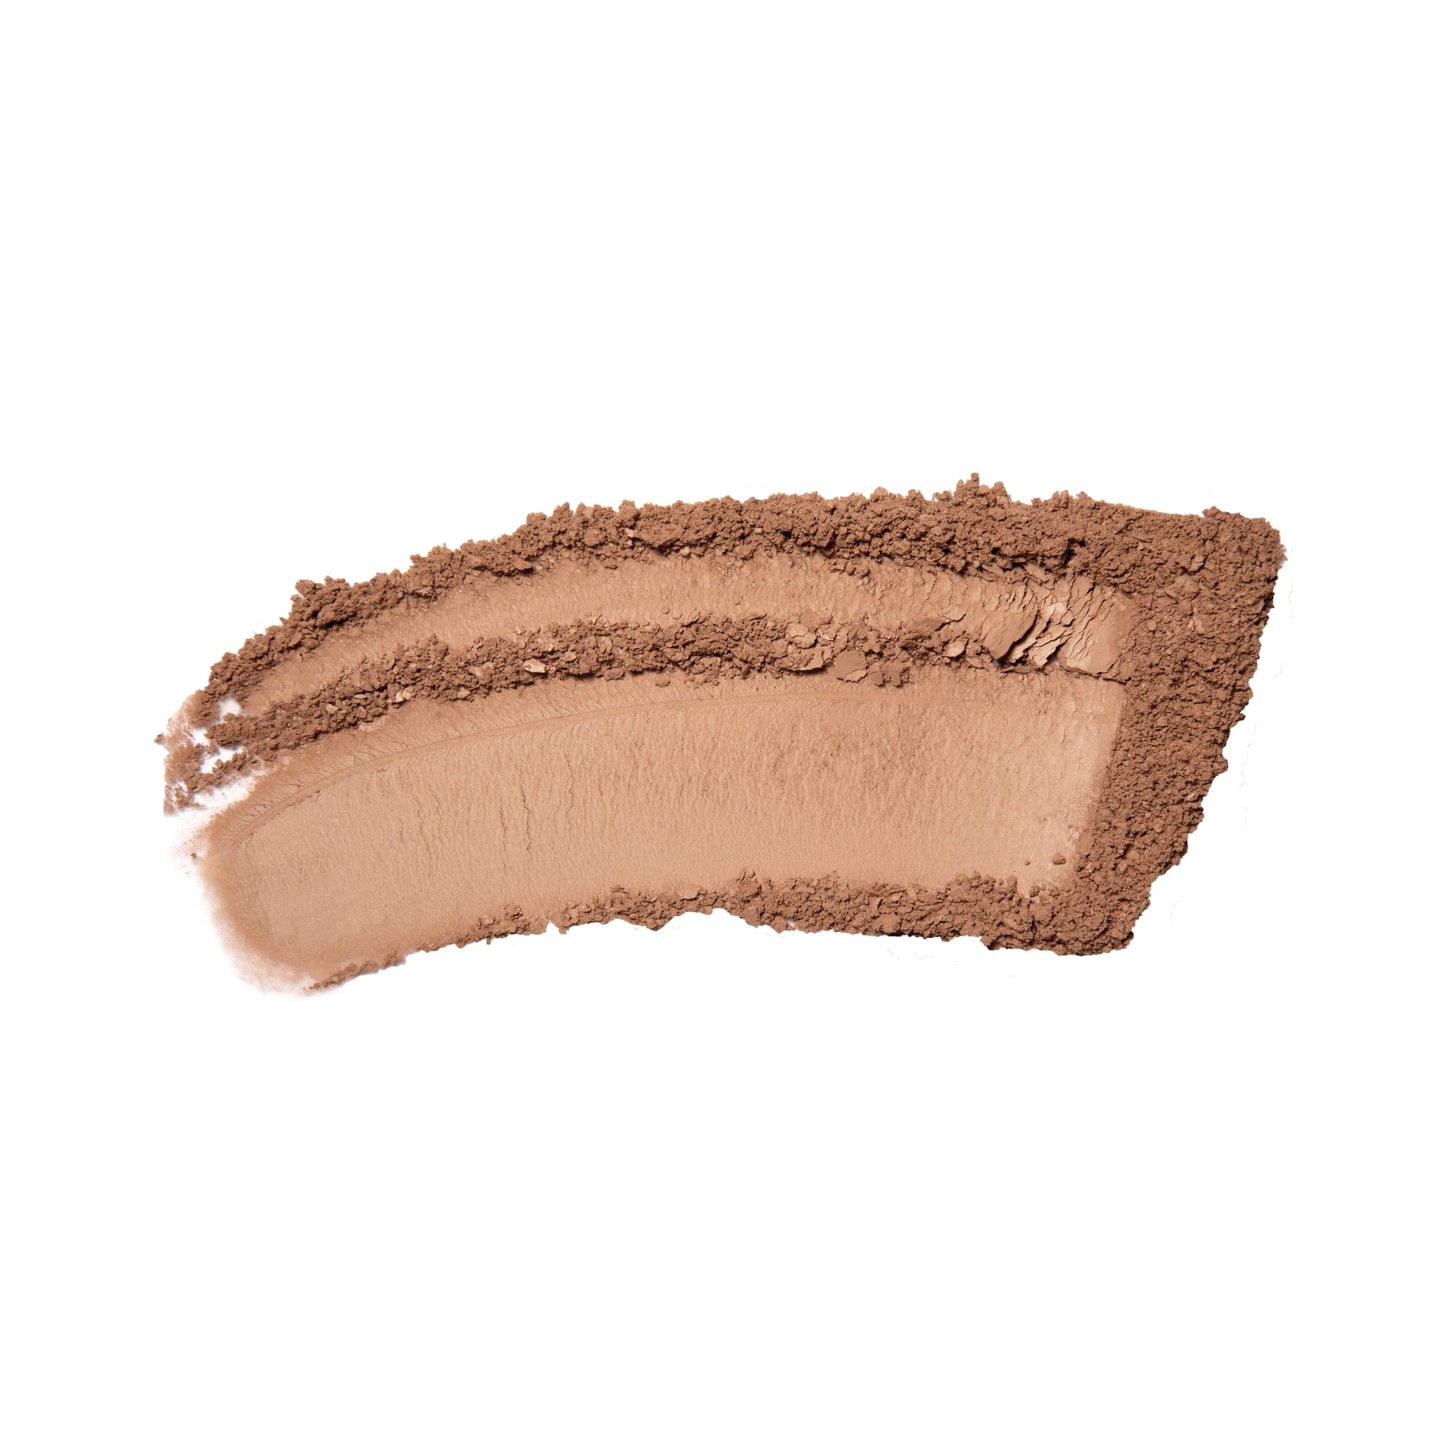 100% PURE Fruit Pigmented Powder Foundation toffee